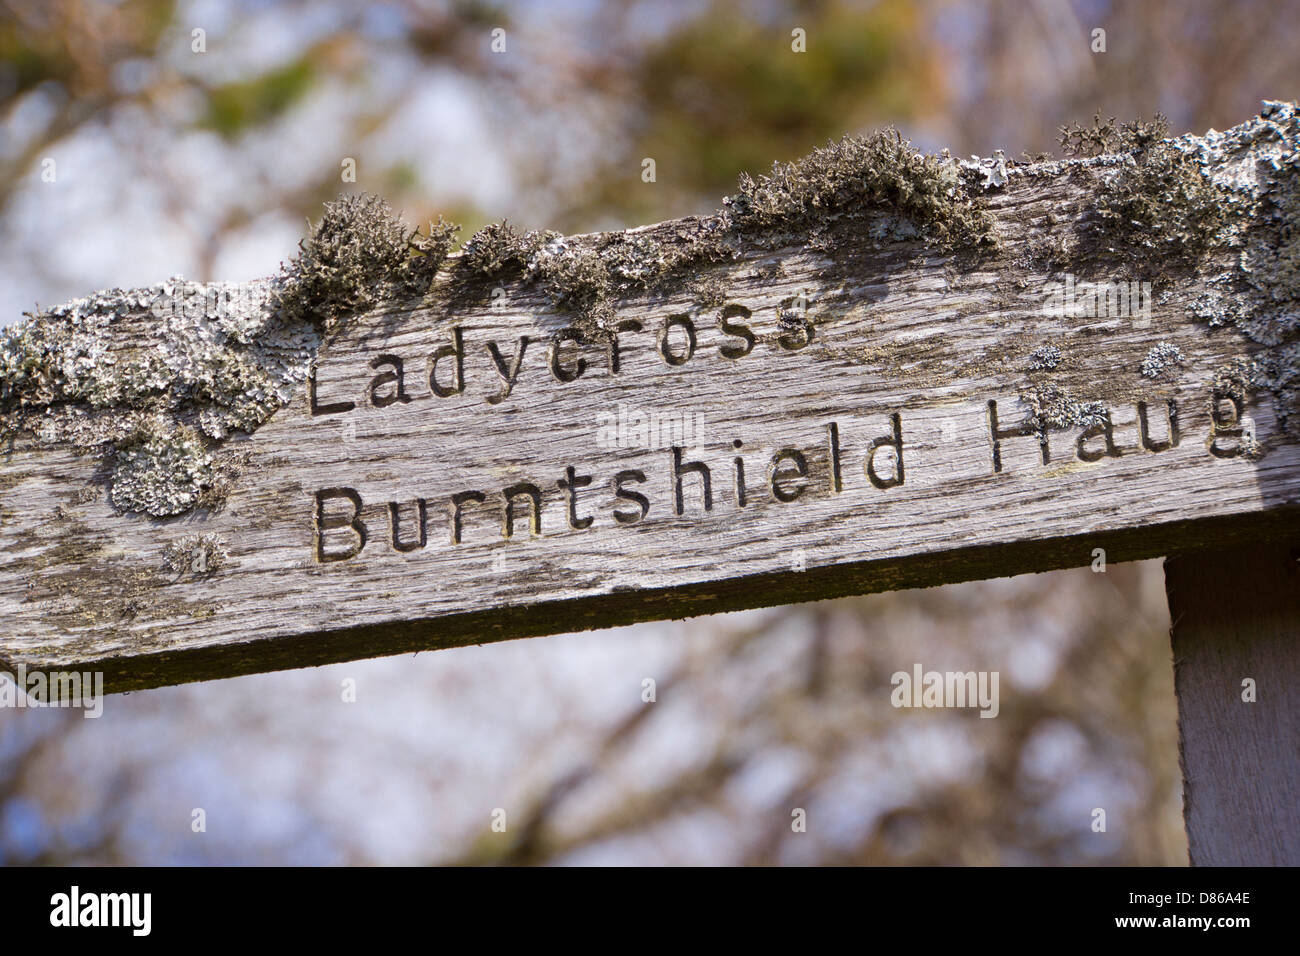 A signpost for Ladycross and Burnshield Haugh near Blanchland in Northumberland. Stock Photo